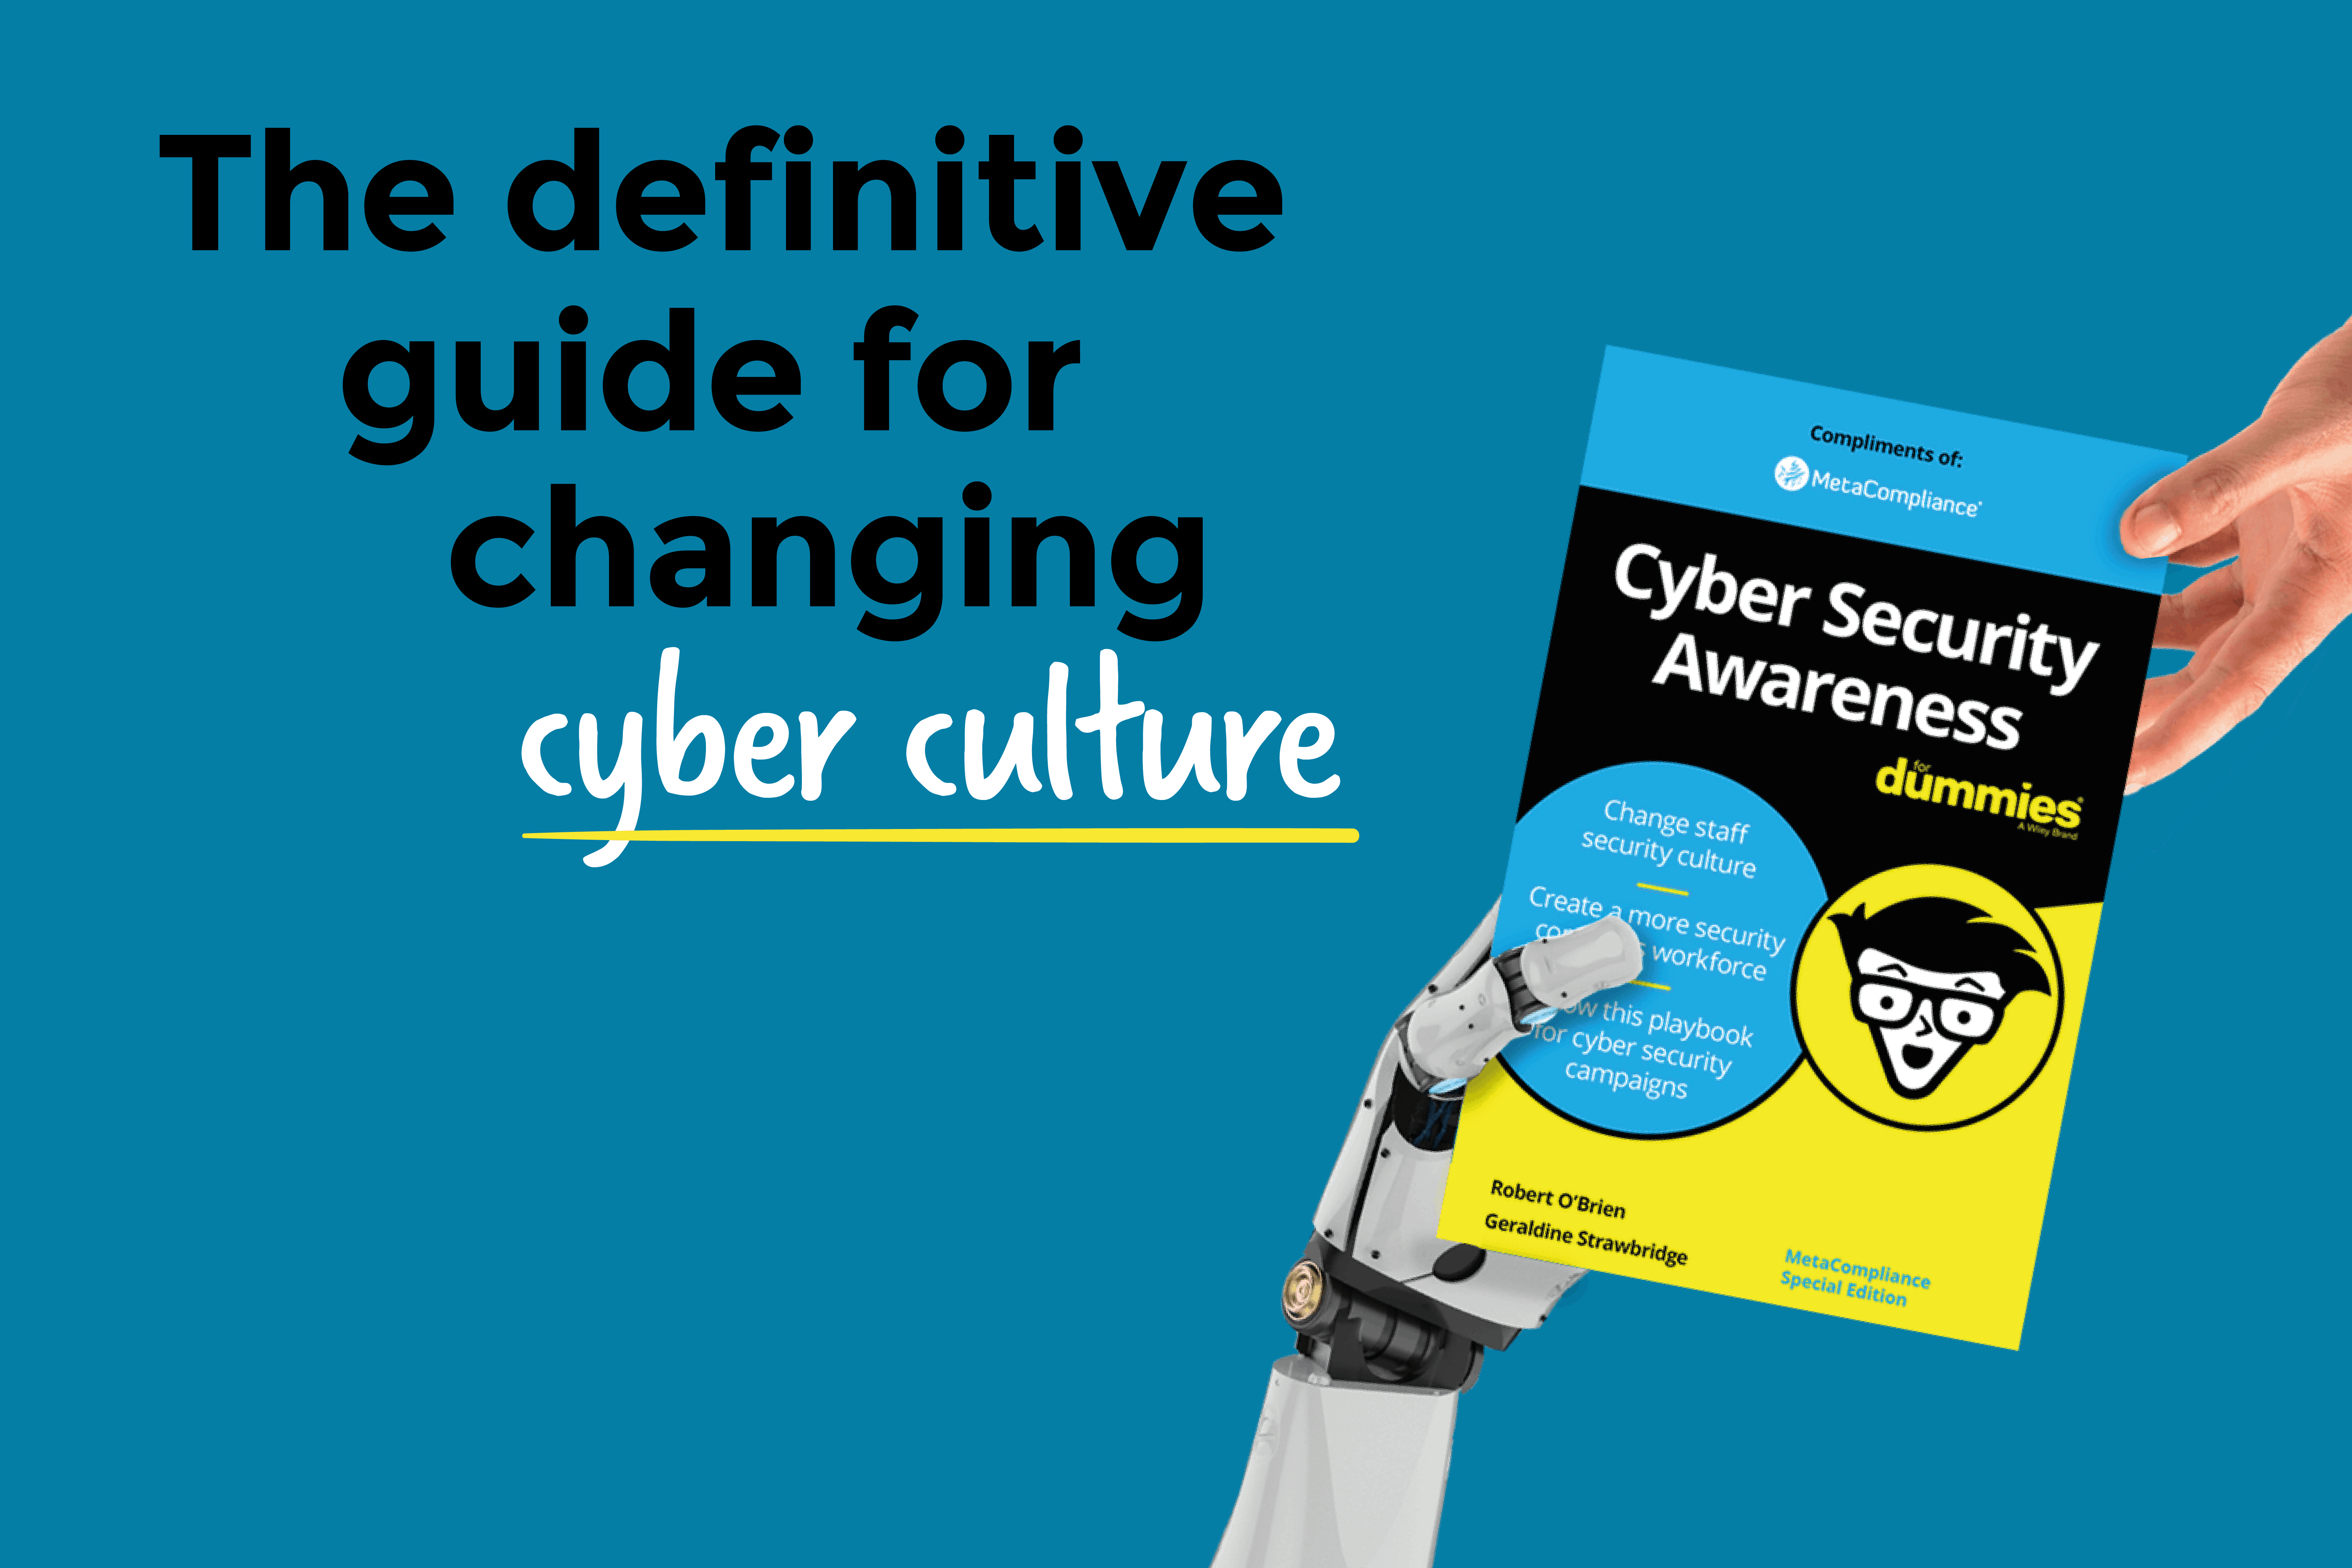 MetaCompliance Release the Definitive Playbook for Changing Cyber Security Culture